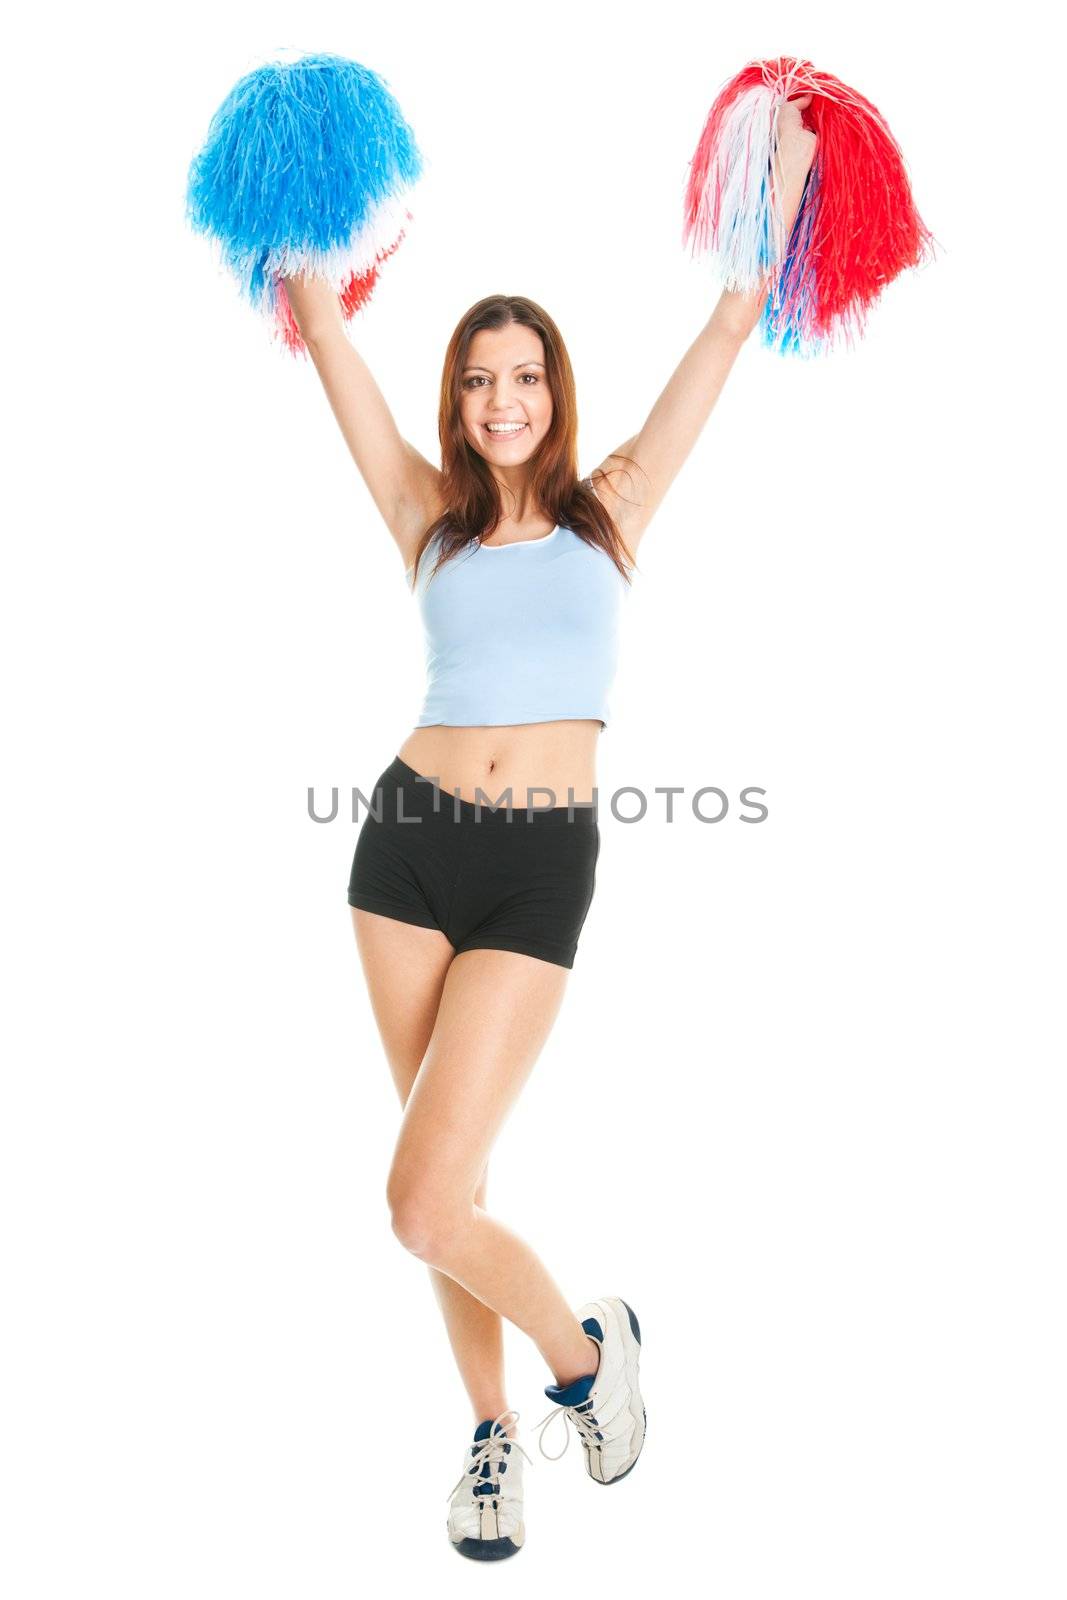 Smiling cheerleader girl posing with pom poms. Isolated on white